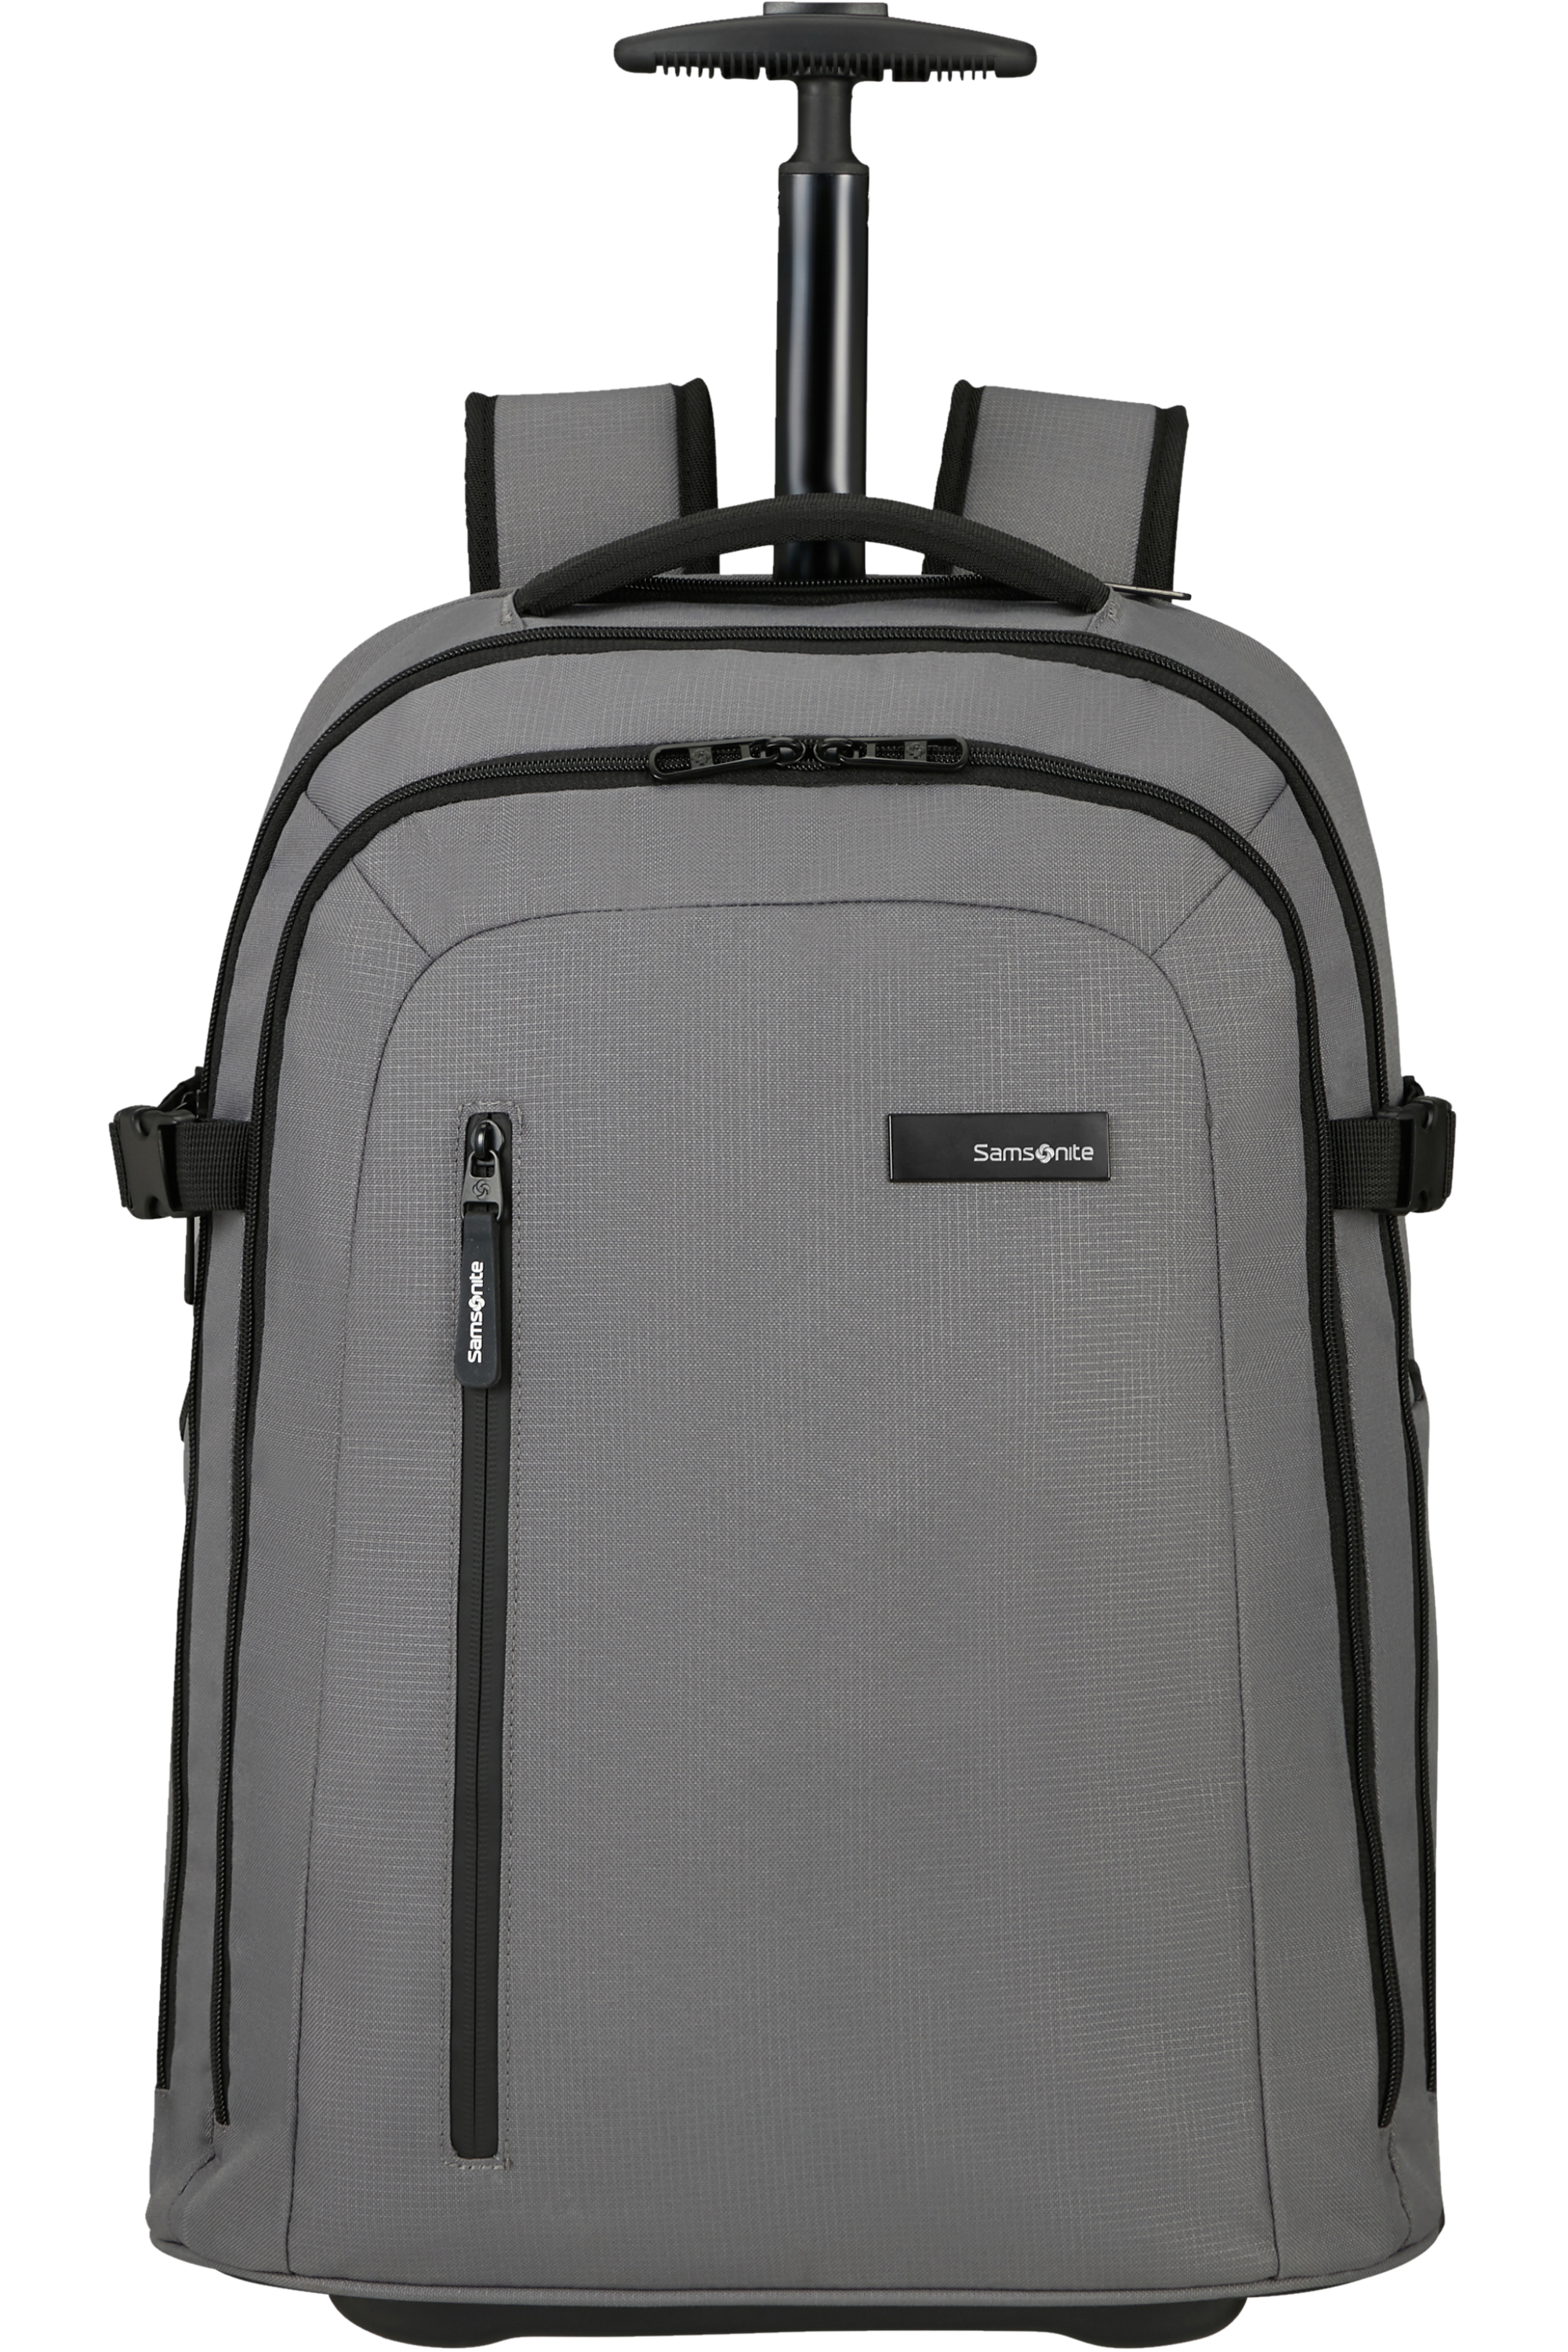 Samsonite Evoa Spinner 75 cms Medium Check-in Size Overnight Trolley Bag|  Suitcase | Luggage with Front Pocket- Brushed Black : Amazon.in: Fashion